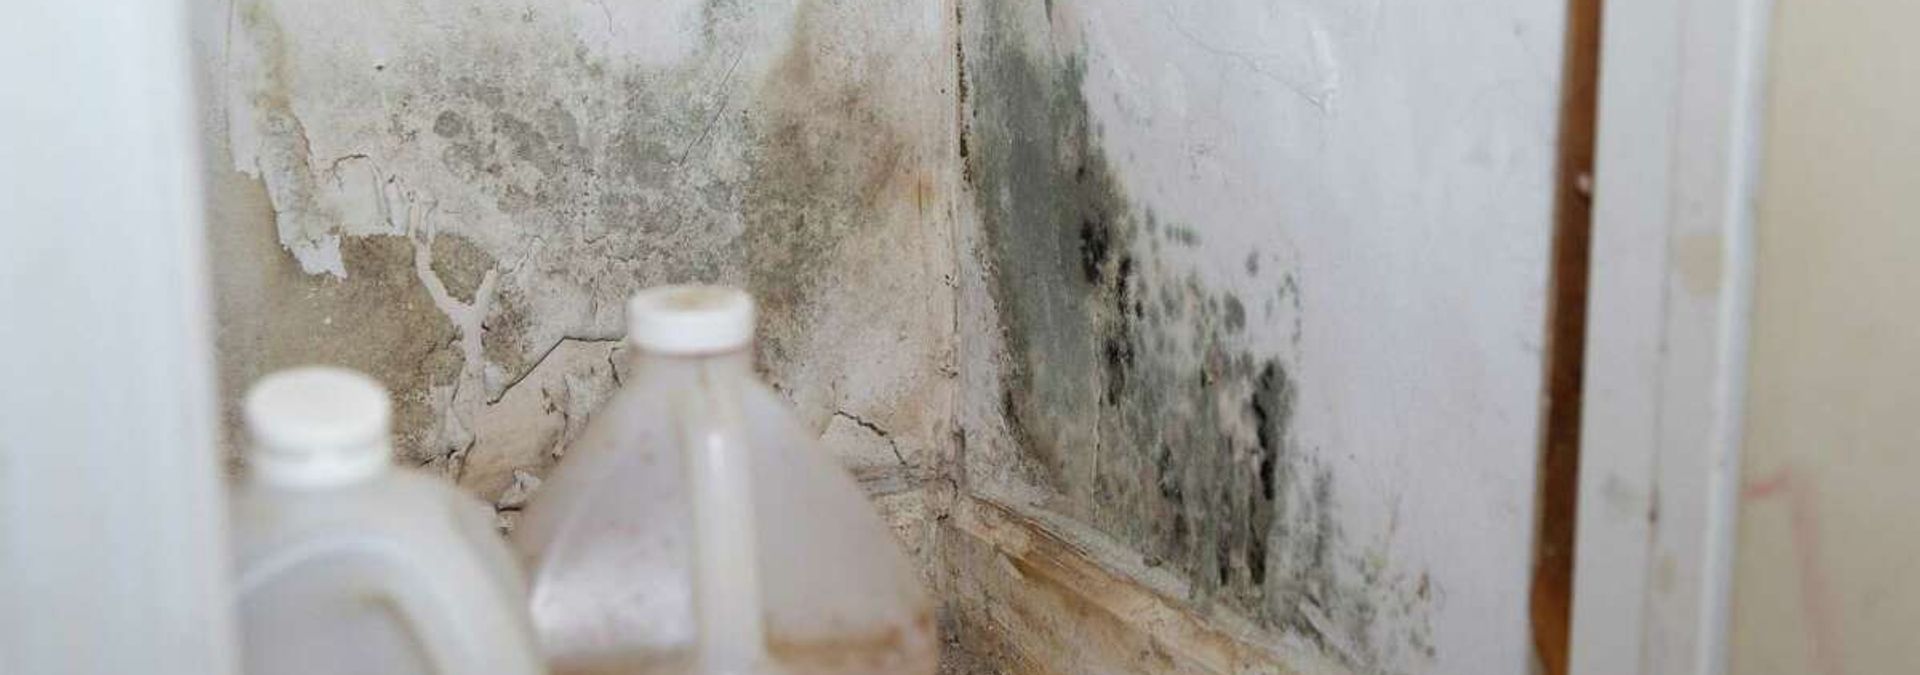 Five years later, mold lingers in the pantry of Gloria Smith's home in Acres Homes, which was flooded by Hurricane Harvey. Photo: Yi-Chin Lee.